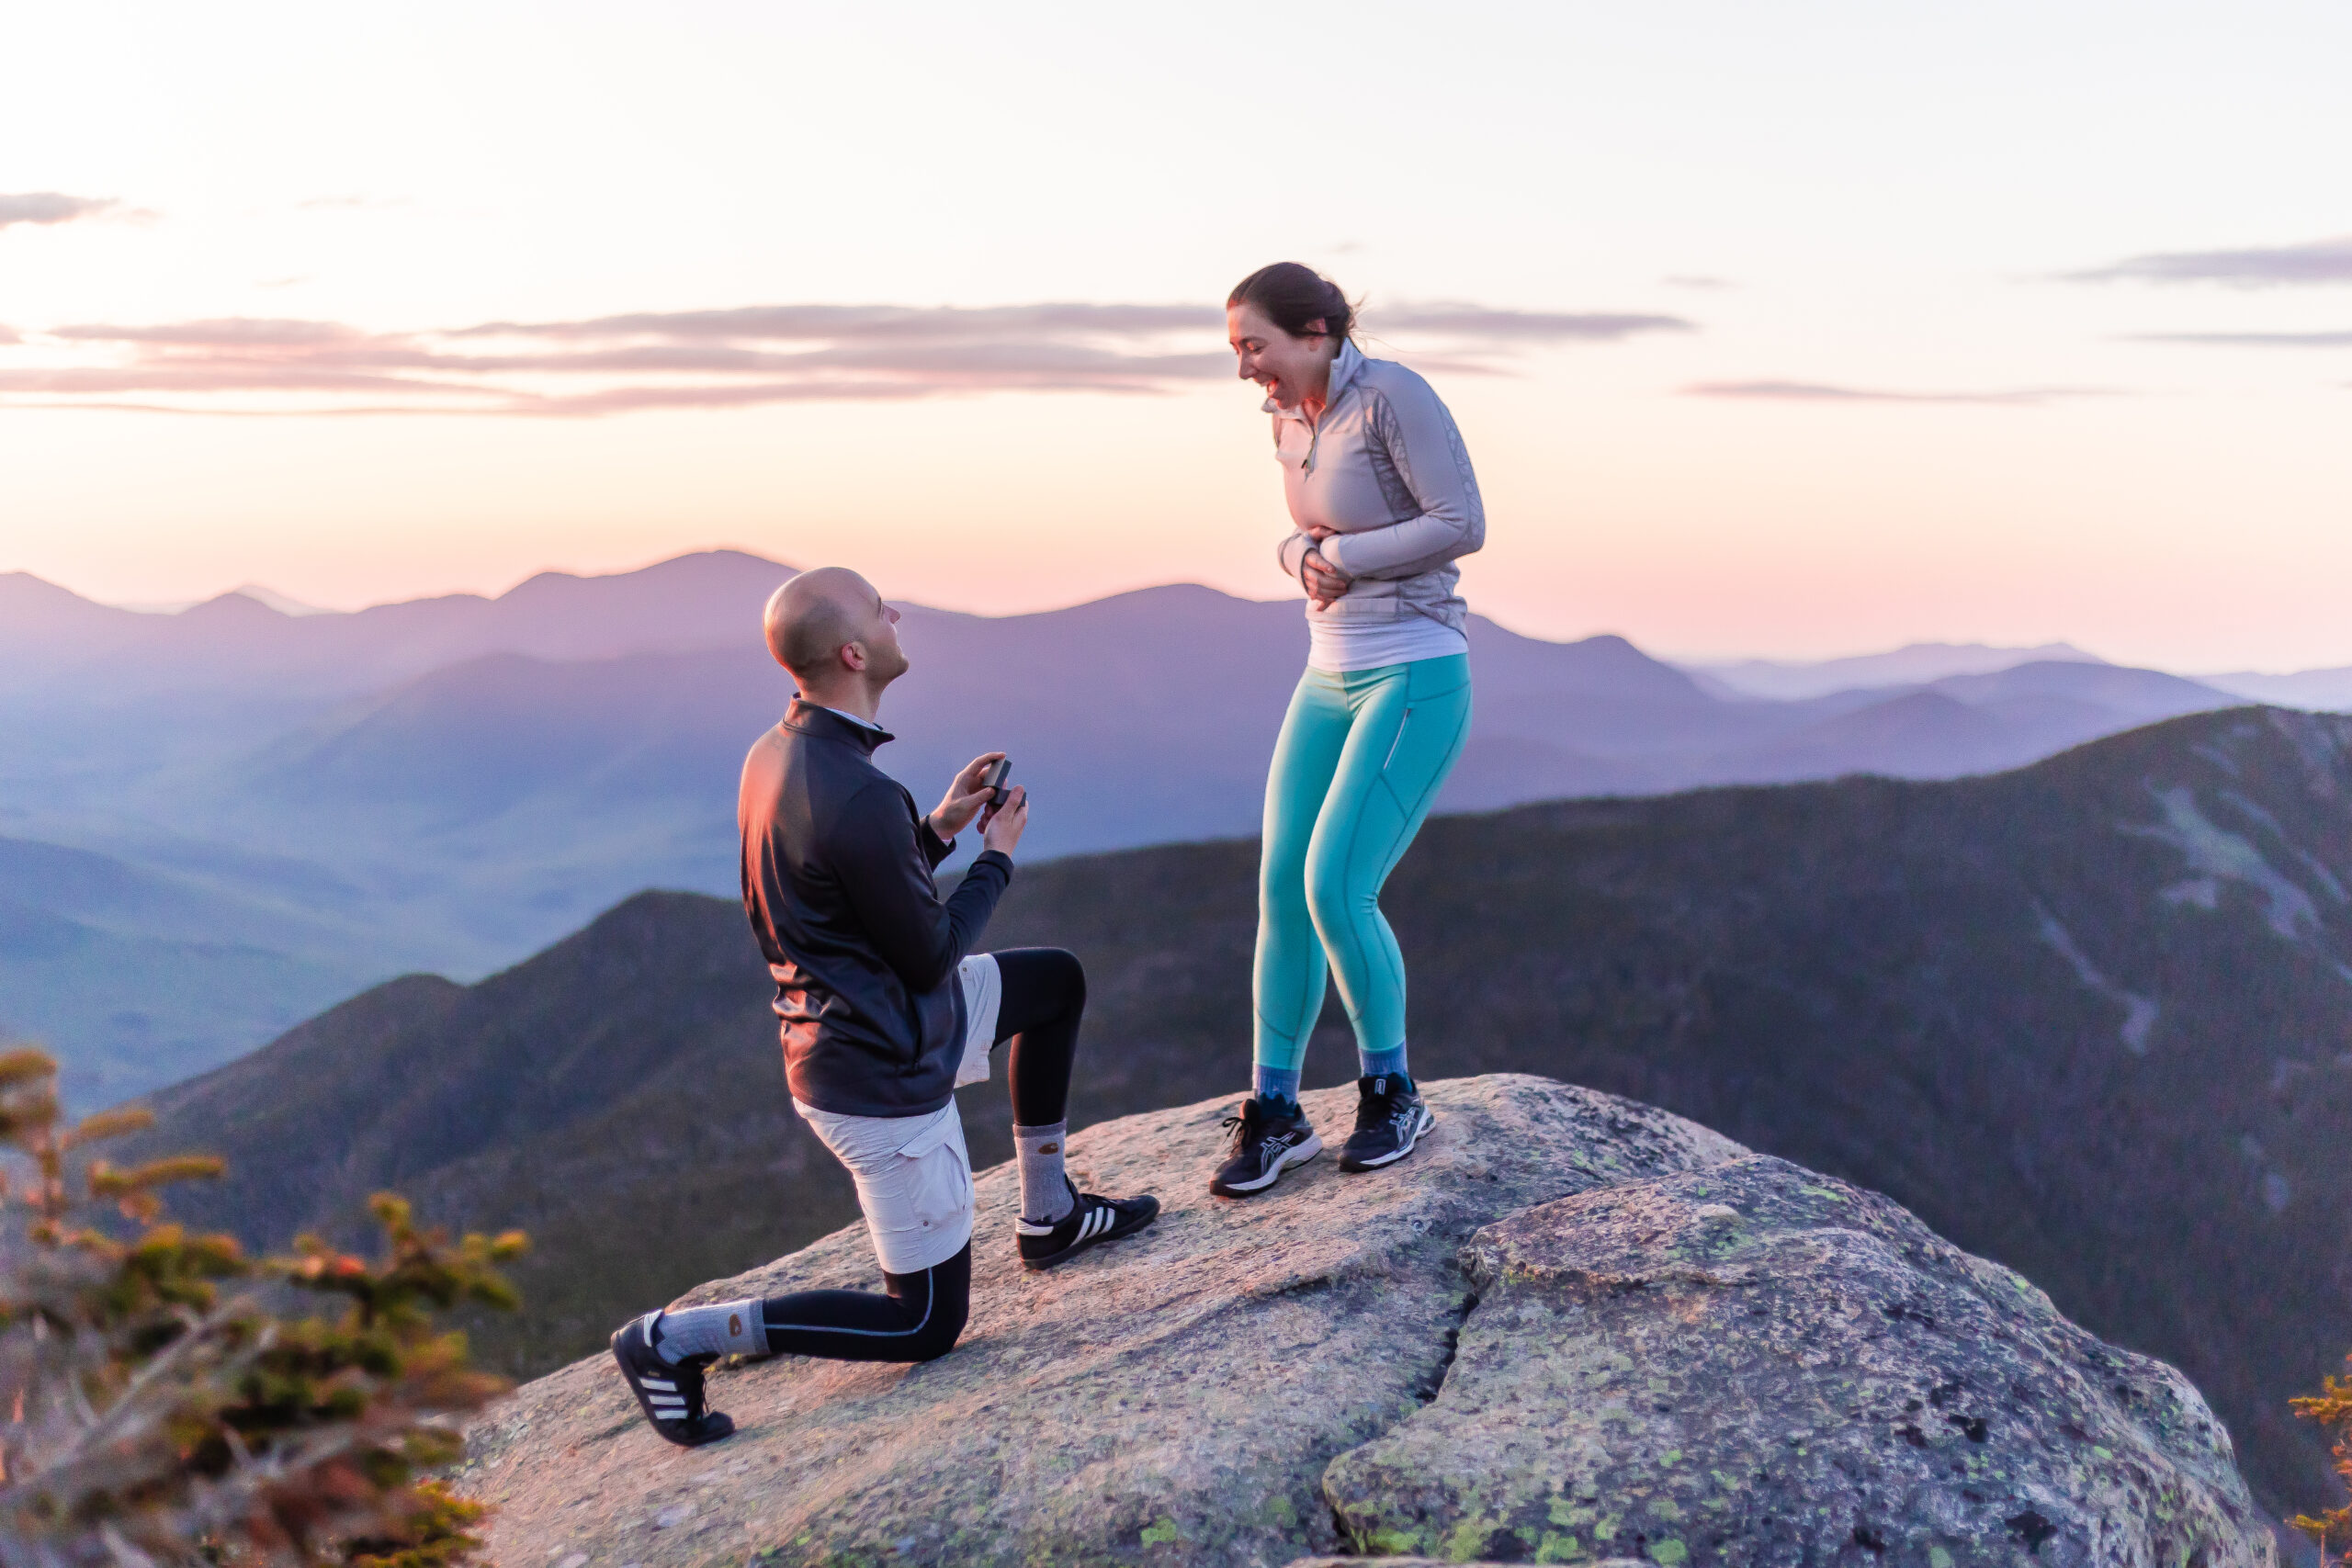 Amy and Doug's Proposal on top of Mount Liberty in Franconia Notch.